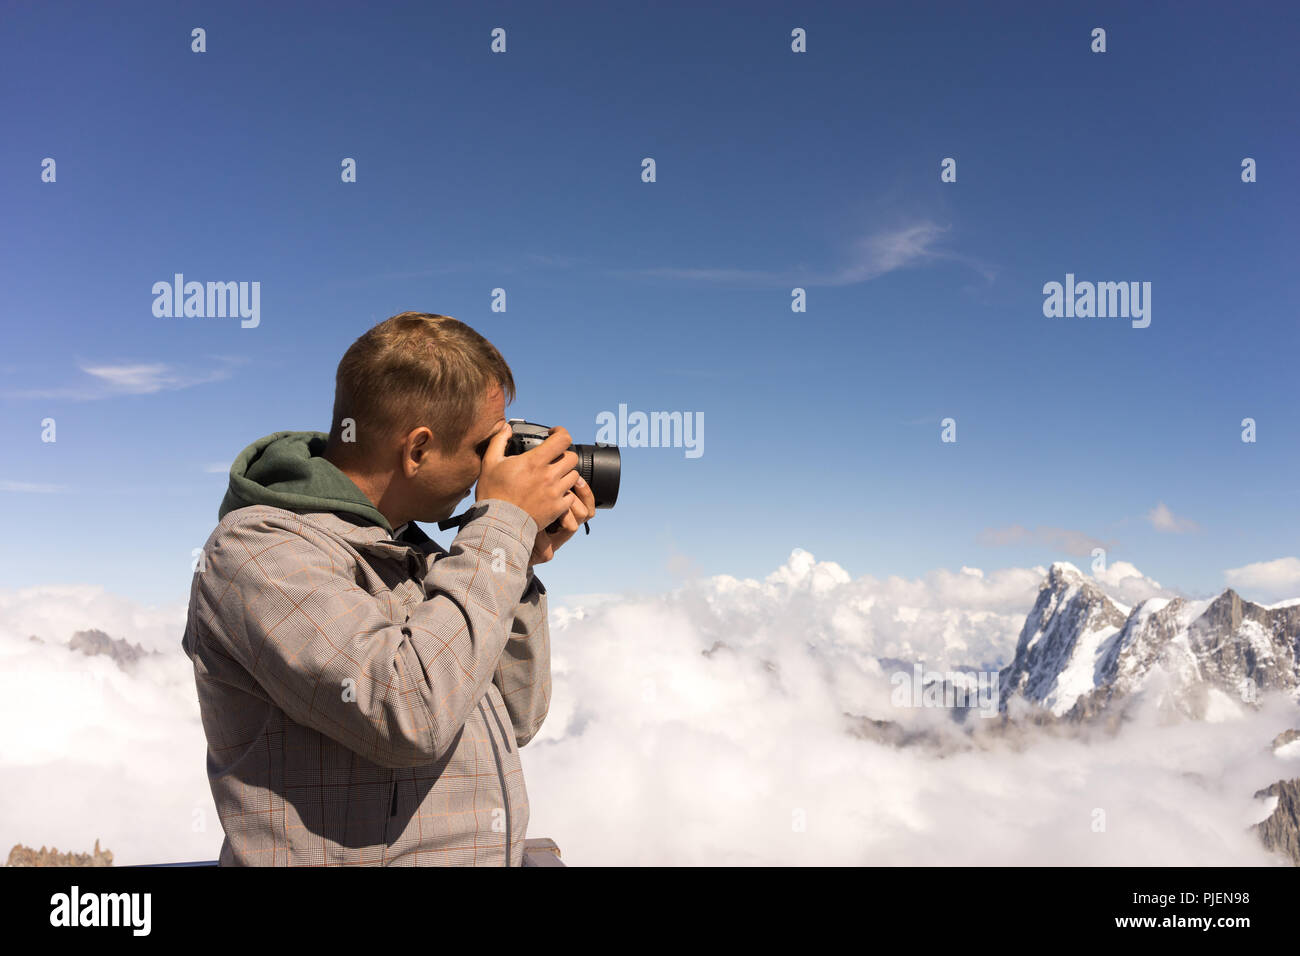 Photographer in Alps with camera at eye mountain background Stock Photo